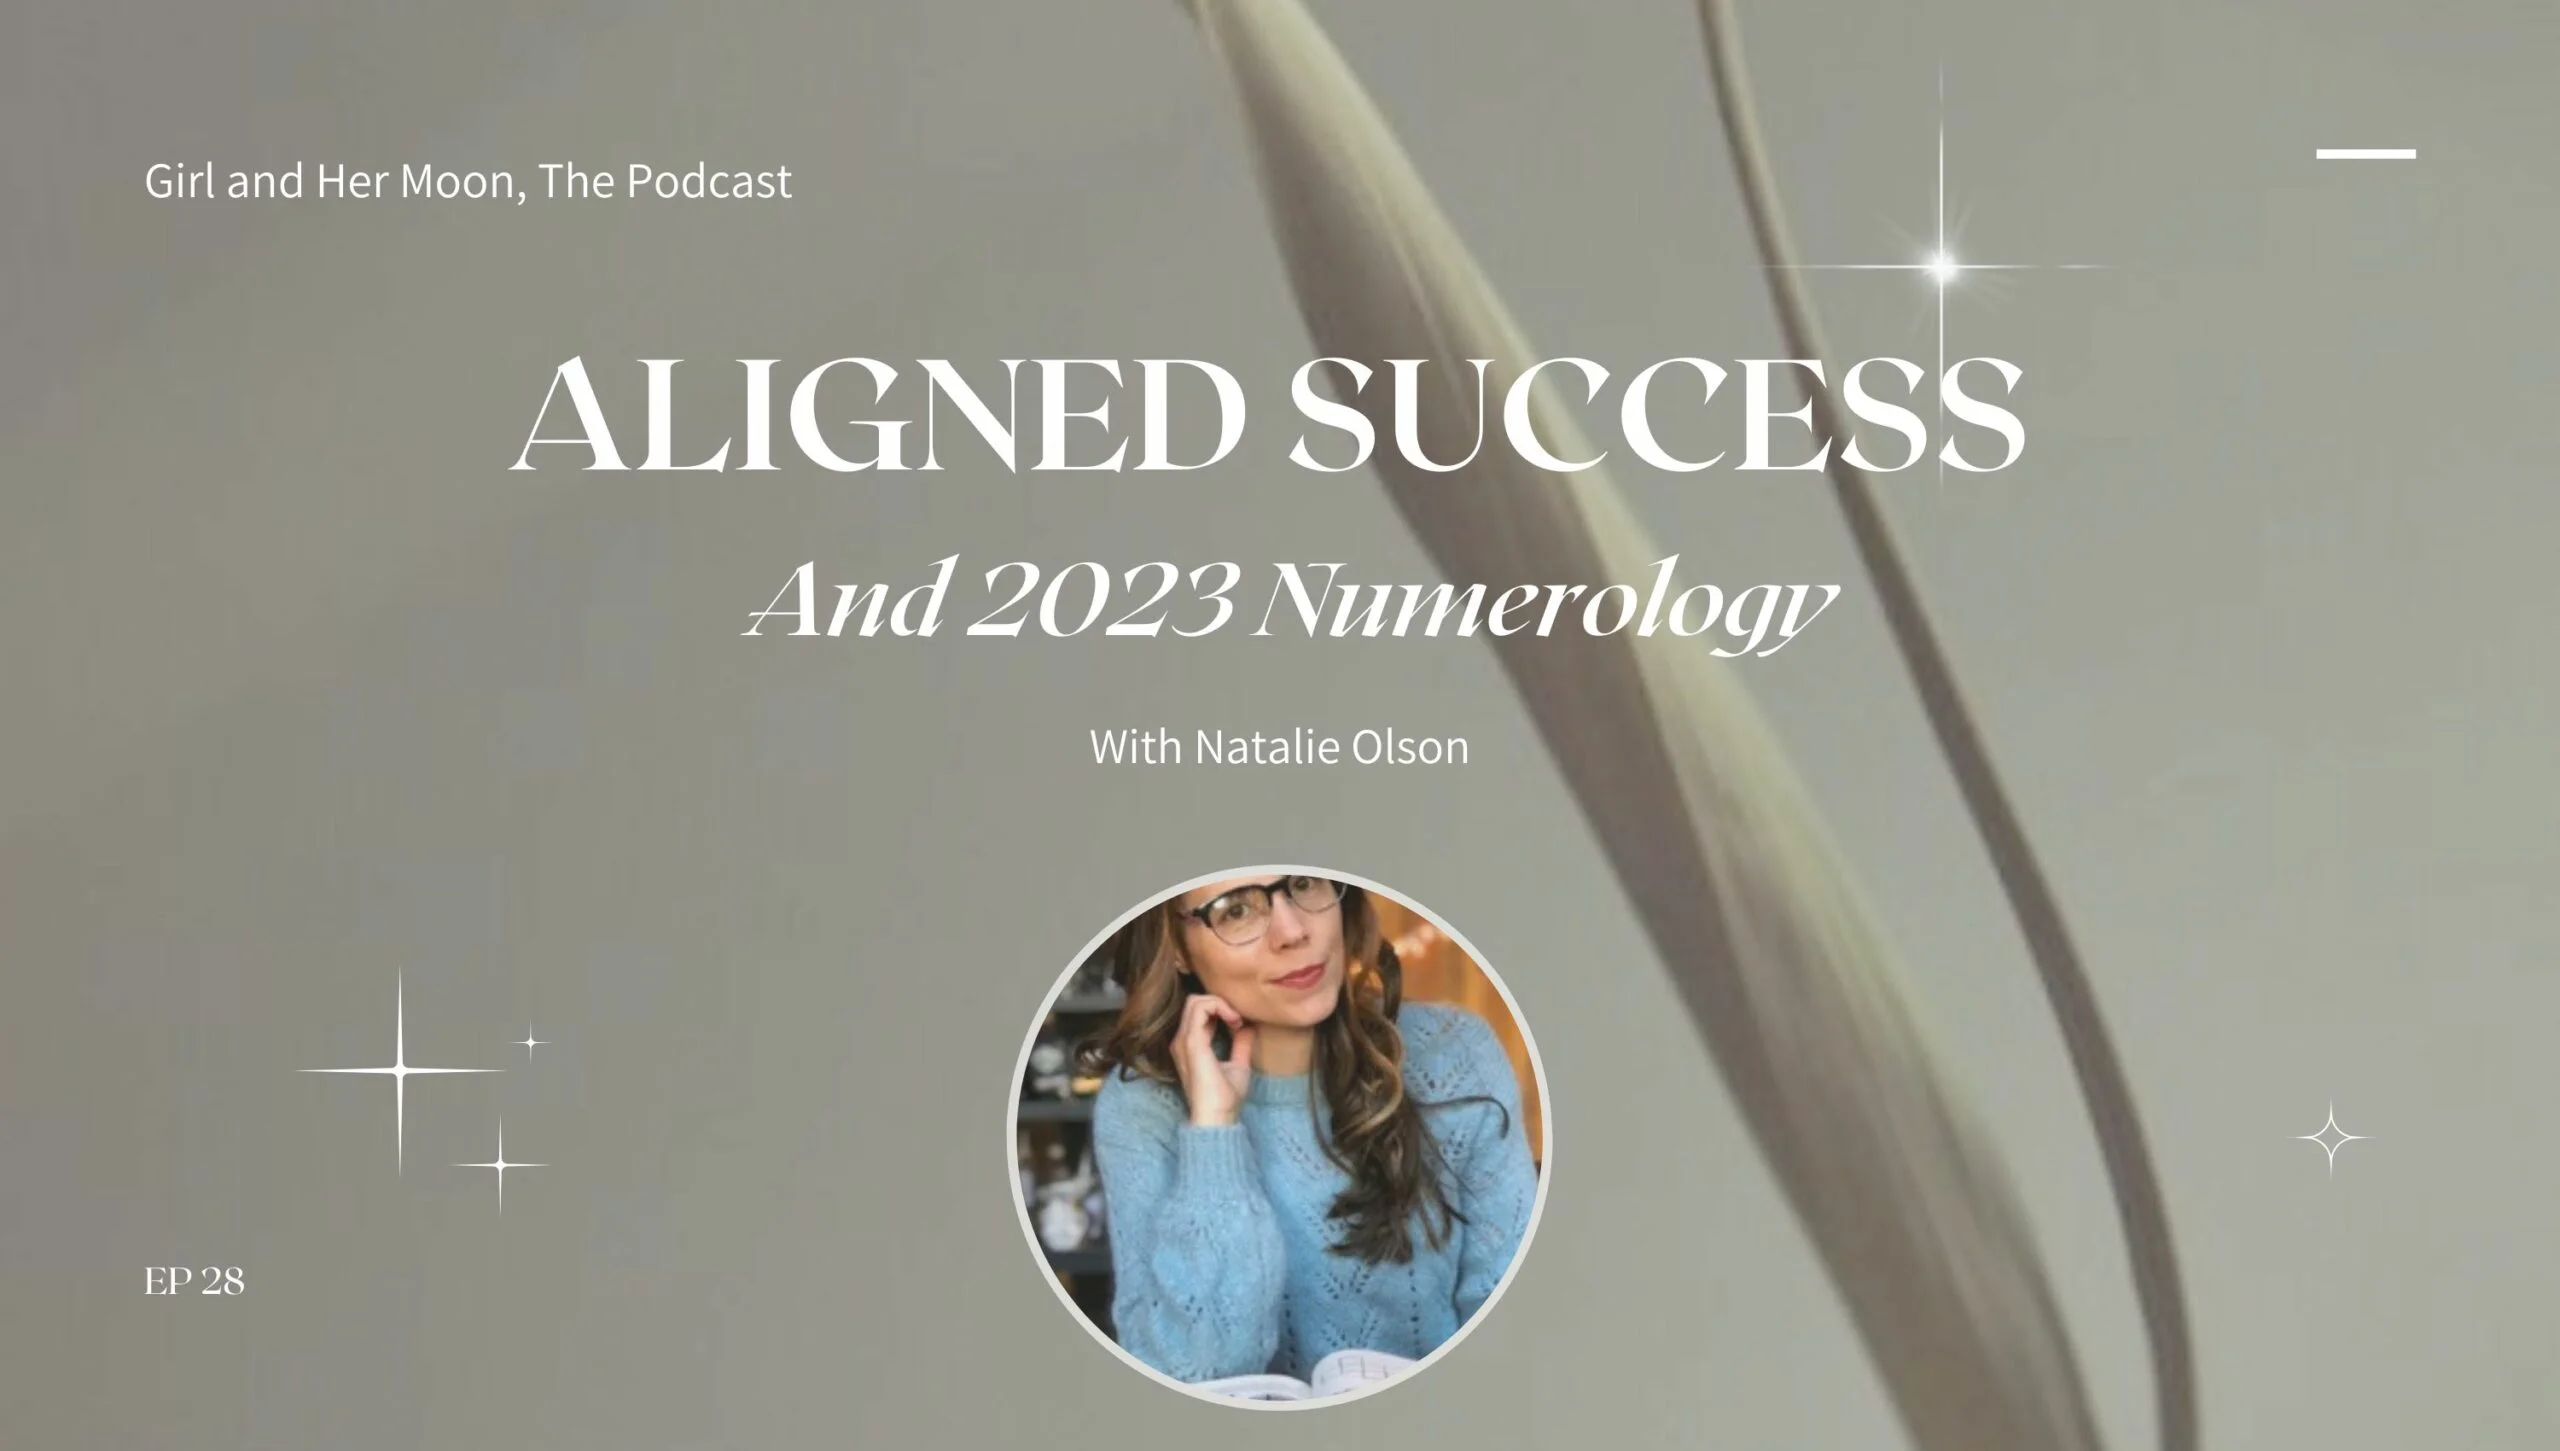 Aligned Success and 2023 Numerology with Natalie Olson Girl and Her Moon the Podcast